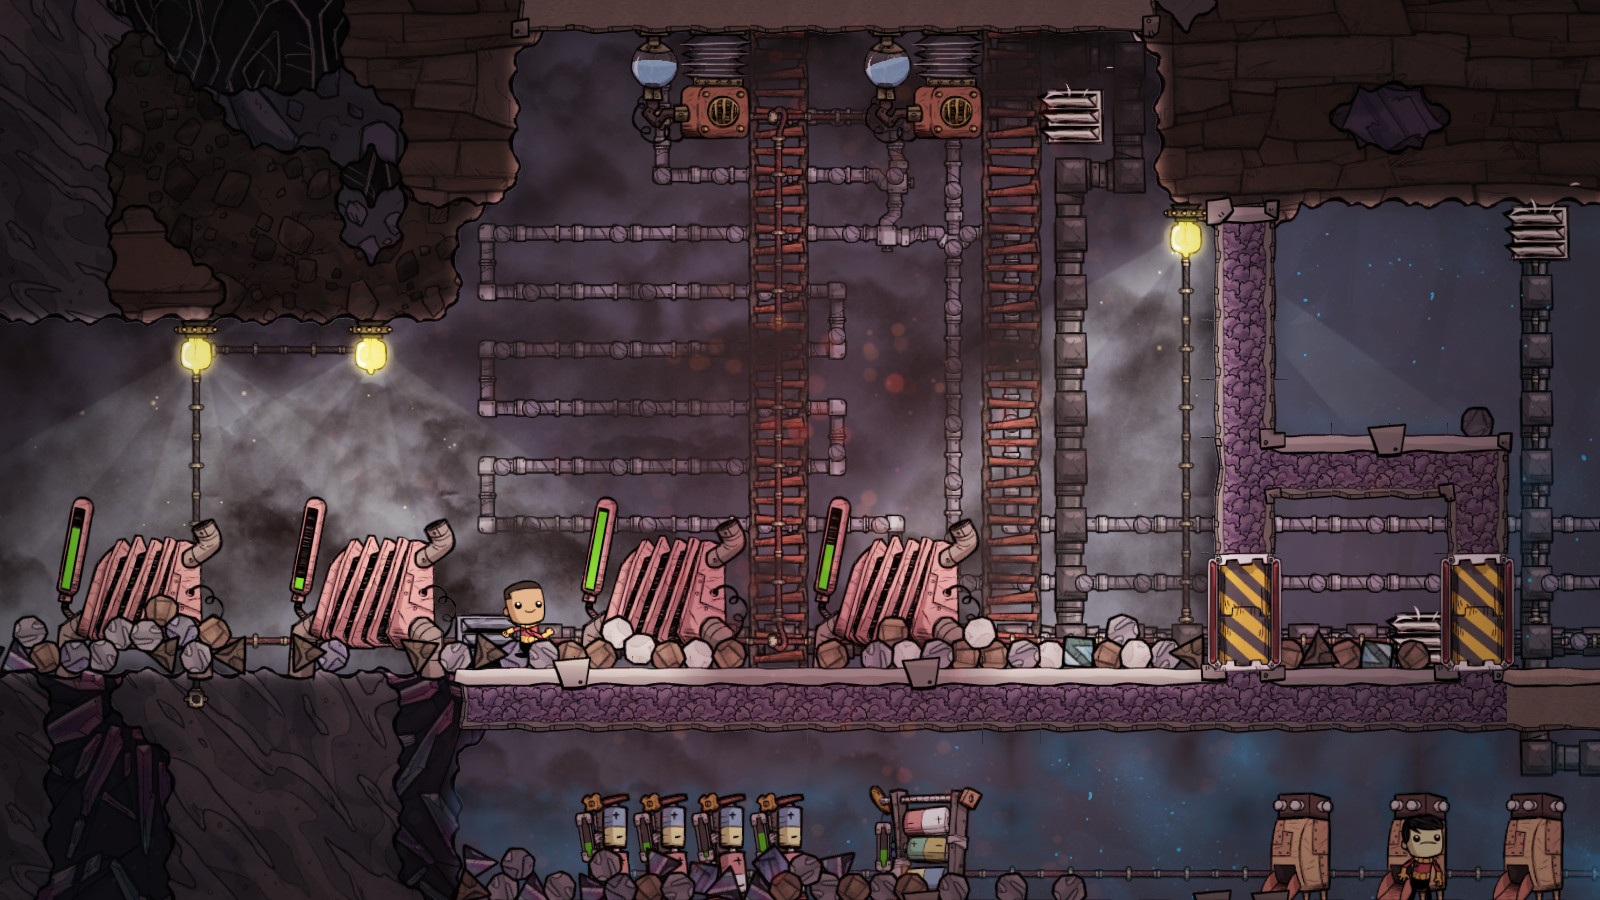 Oxygen Not Included - Spaced Out! on Steam